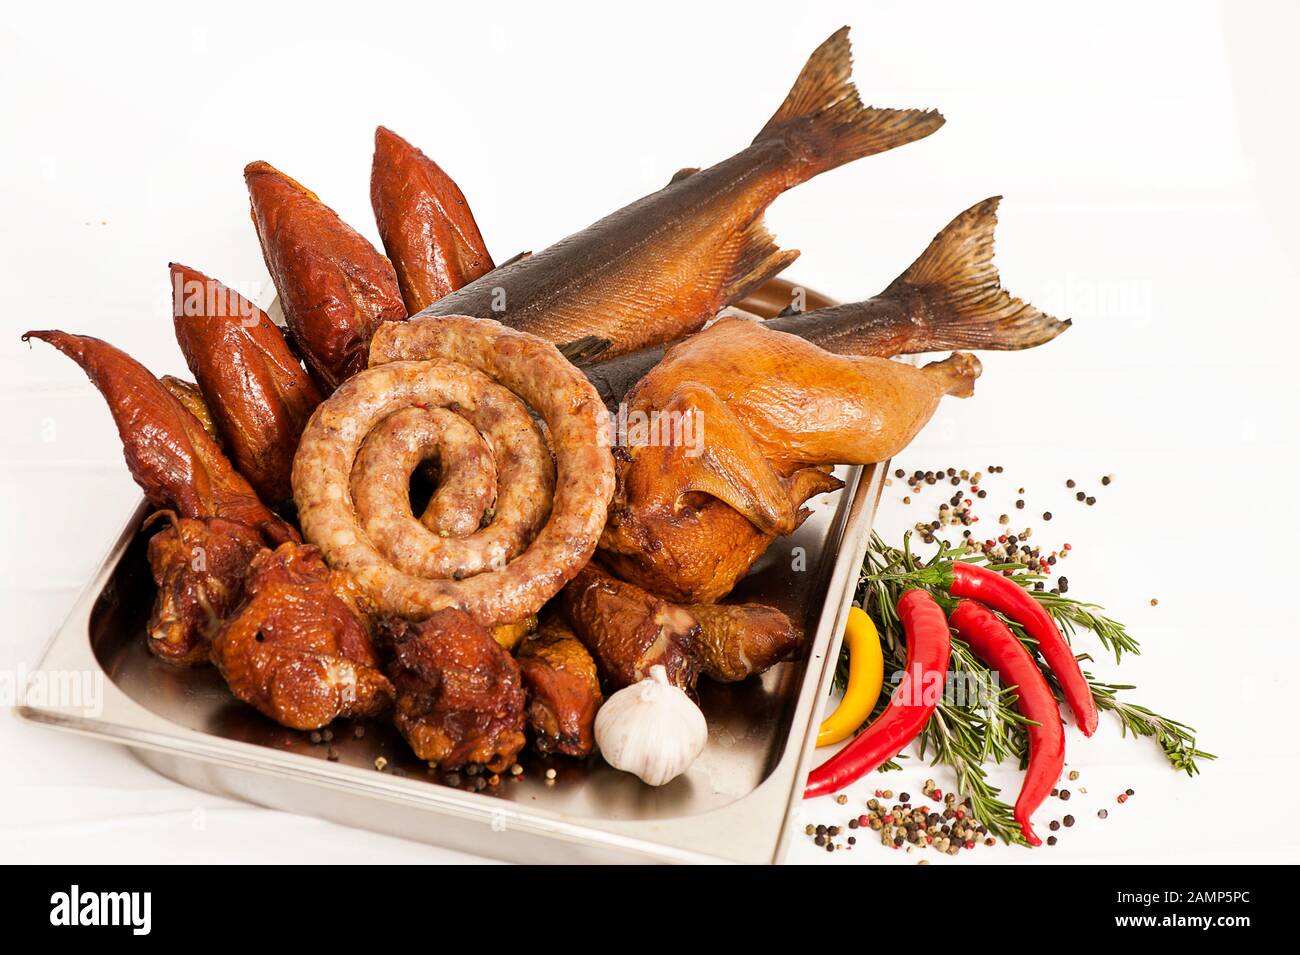 Smoked fish, poultry and sausages on a background with wood and sawdust Stock Photo